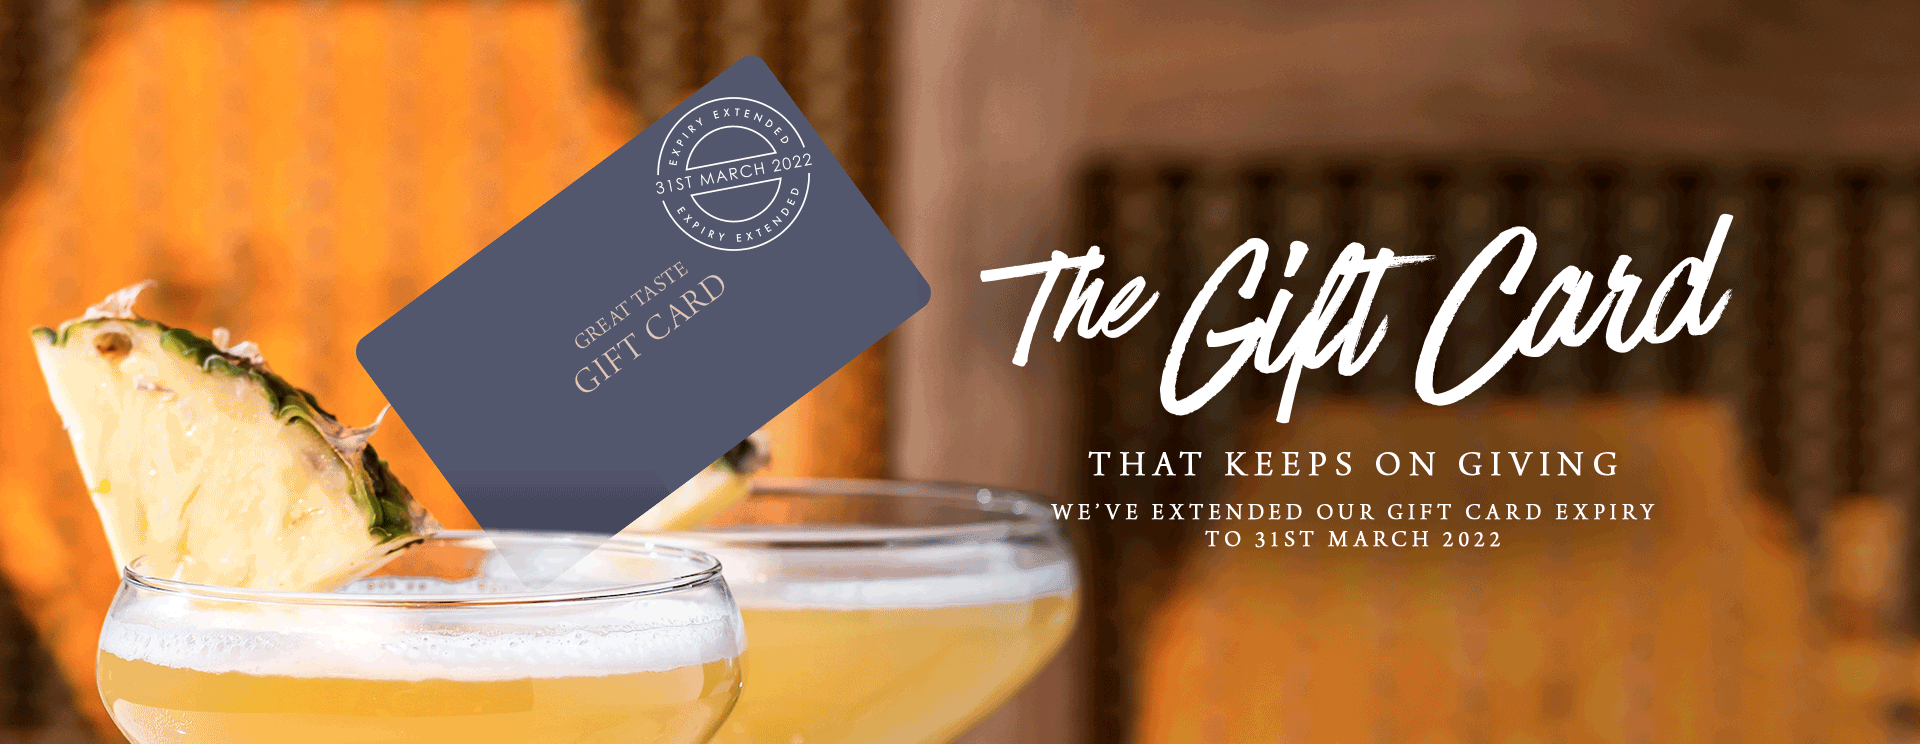 Give the gift of a gift card at The Midland